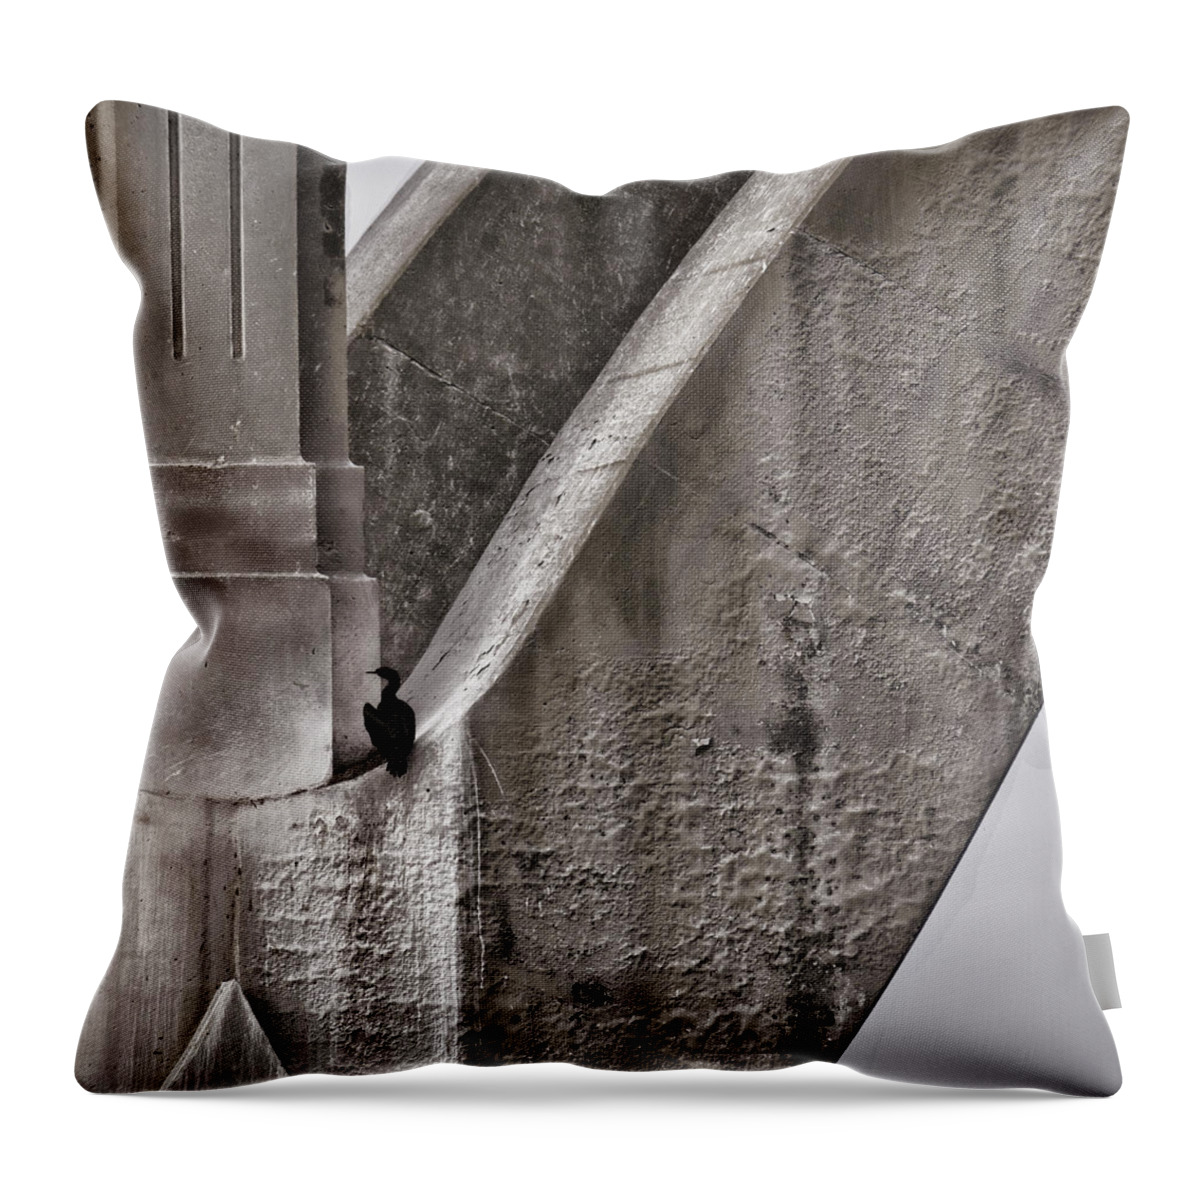 Architecture Throw Pillow featuring the photograph Architectural Detail by Carol Leigh